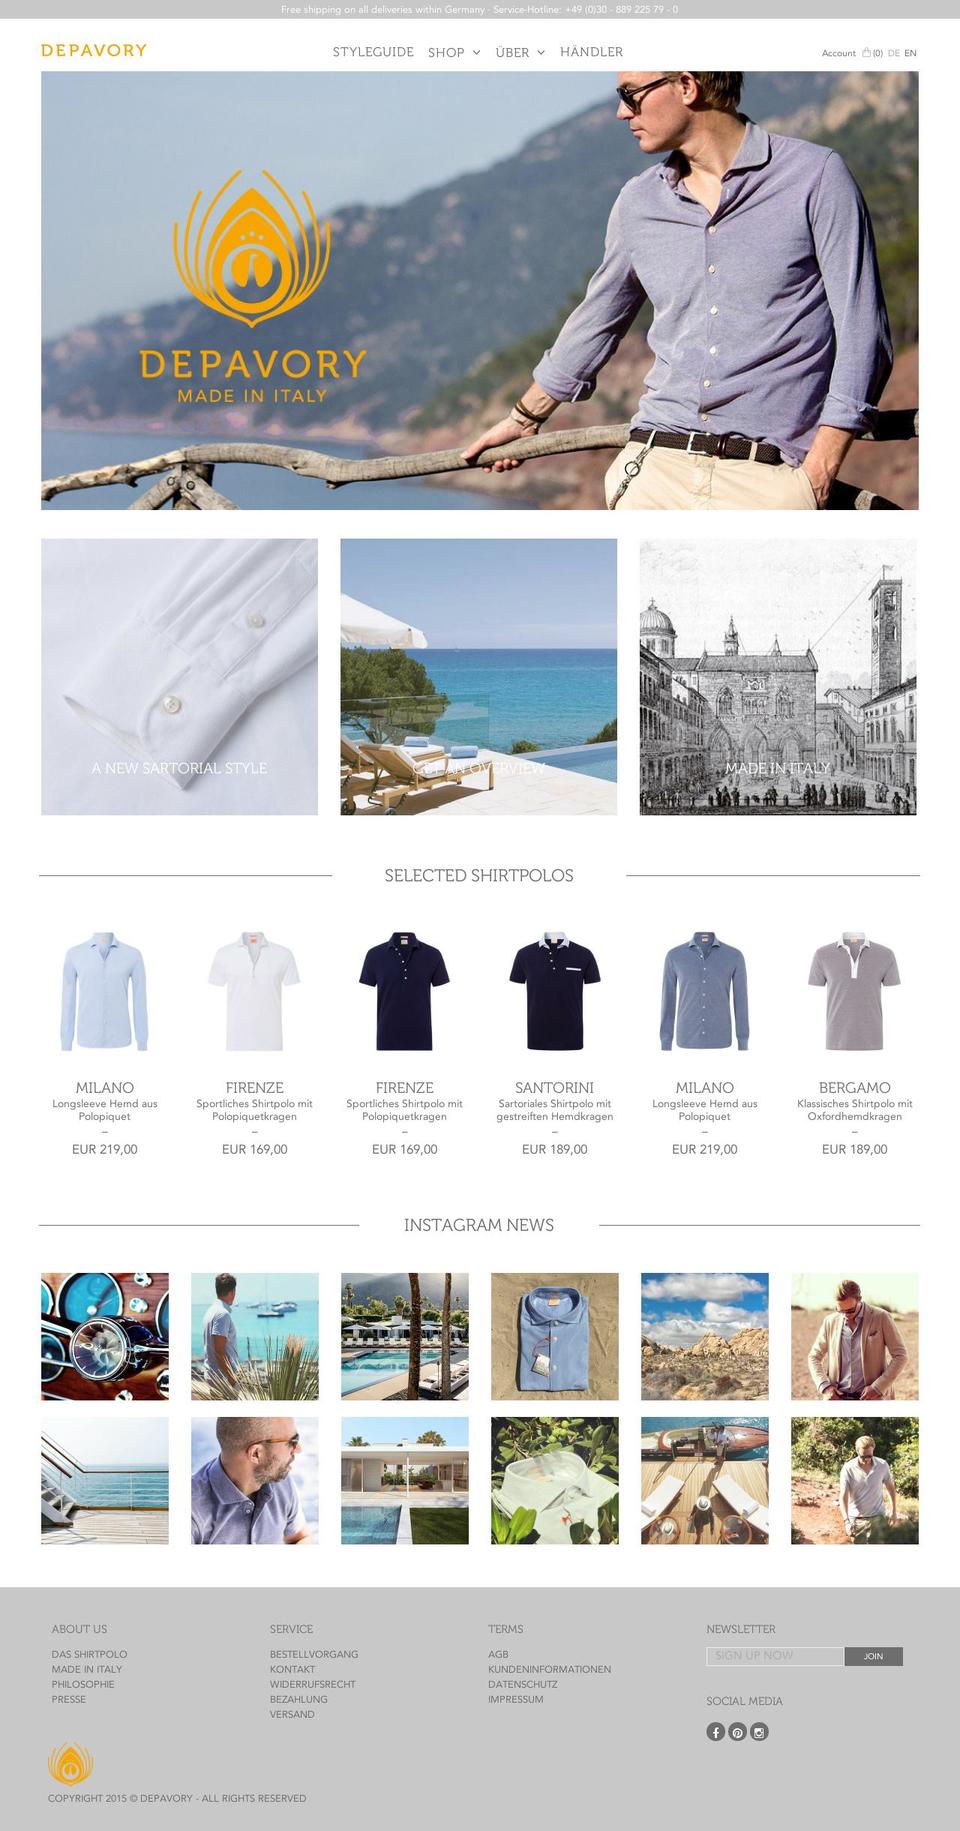 Depavory (2016-05-13) Shopify theme site example shirtpoloworld.info